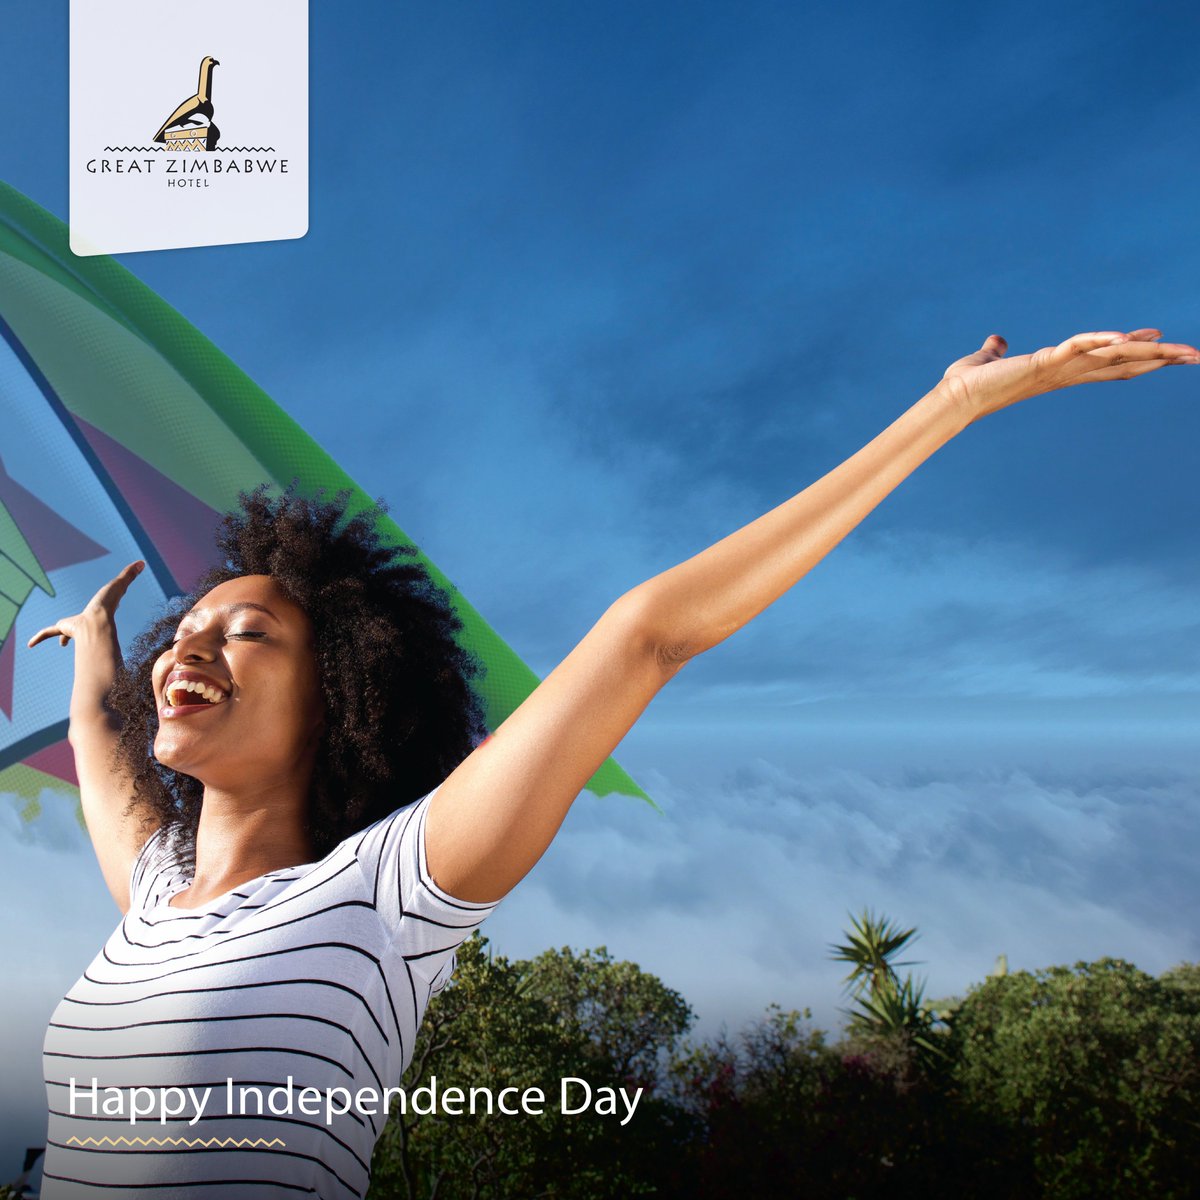 Let your spirit soar on this special day as we commemorate the values of liberty, courage, and the pursuit of new horizons.​

 #HappyIndependence #Zimbabwe #Memories #Nature #GreatZimbabweHotel  #ProudlyAfricanSun #ExperienceExploreEnjoy